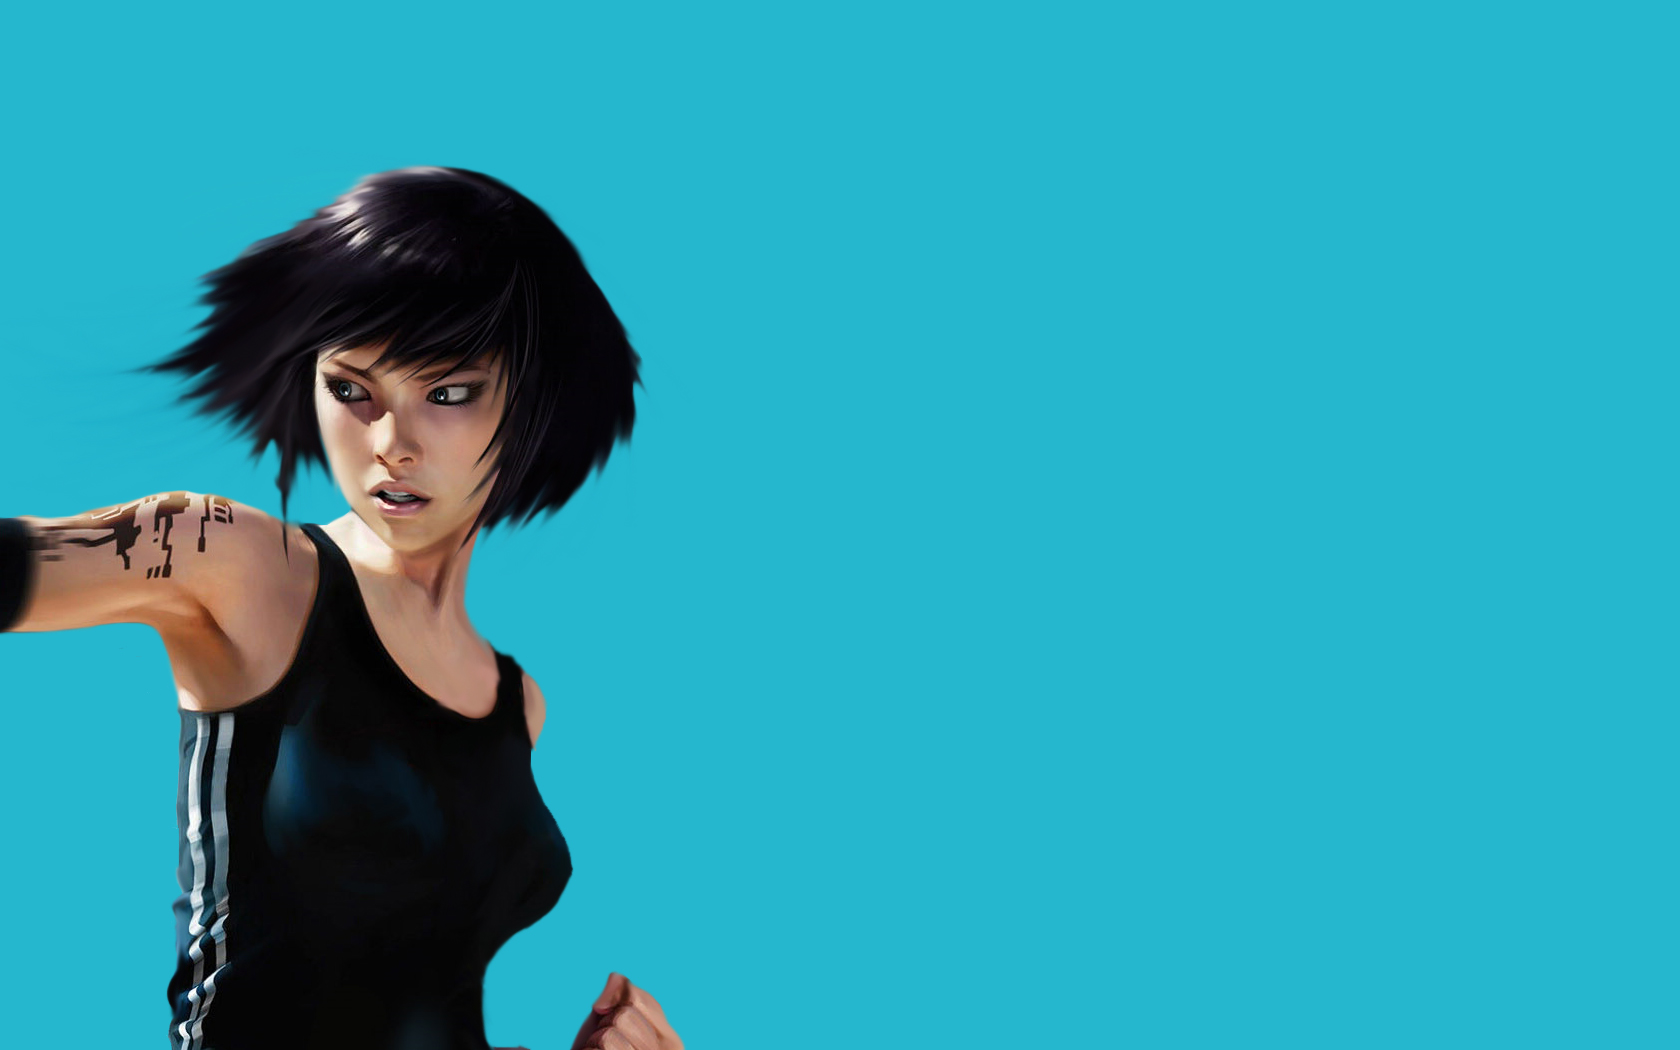 Video Game Mirror's Edge HD Wallpaper Background Image.